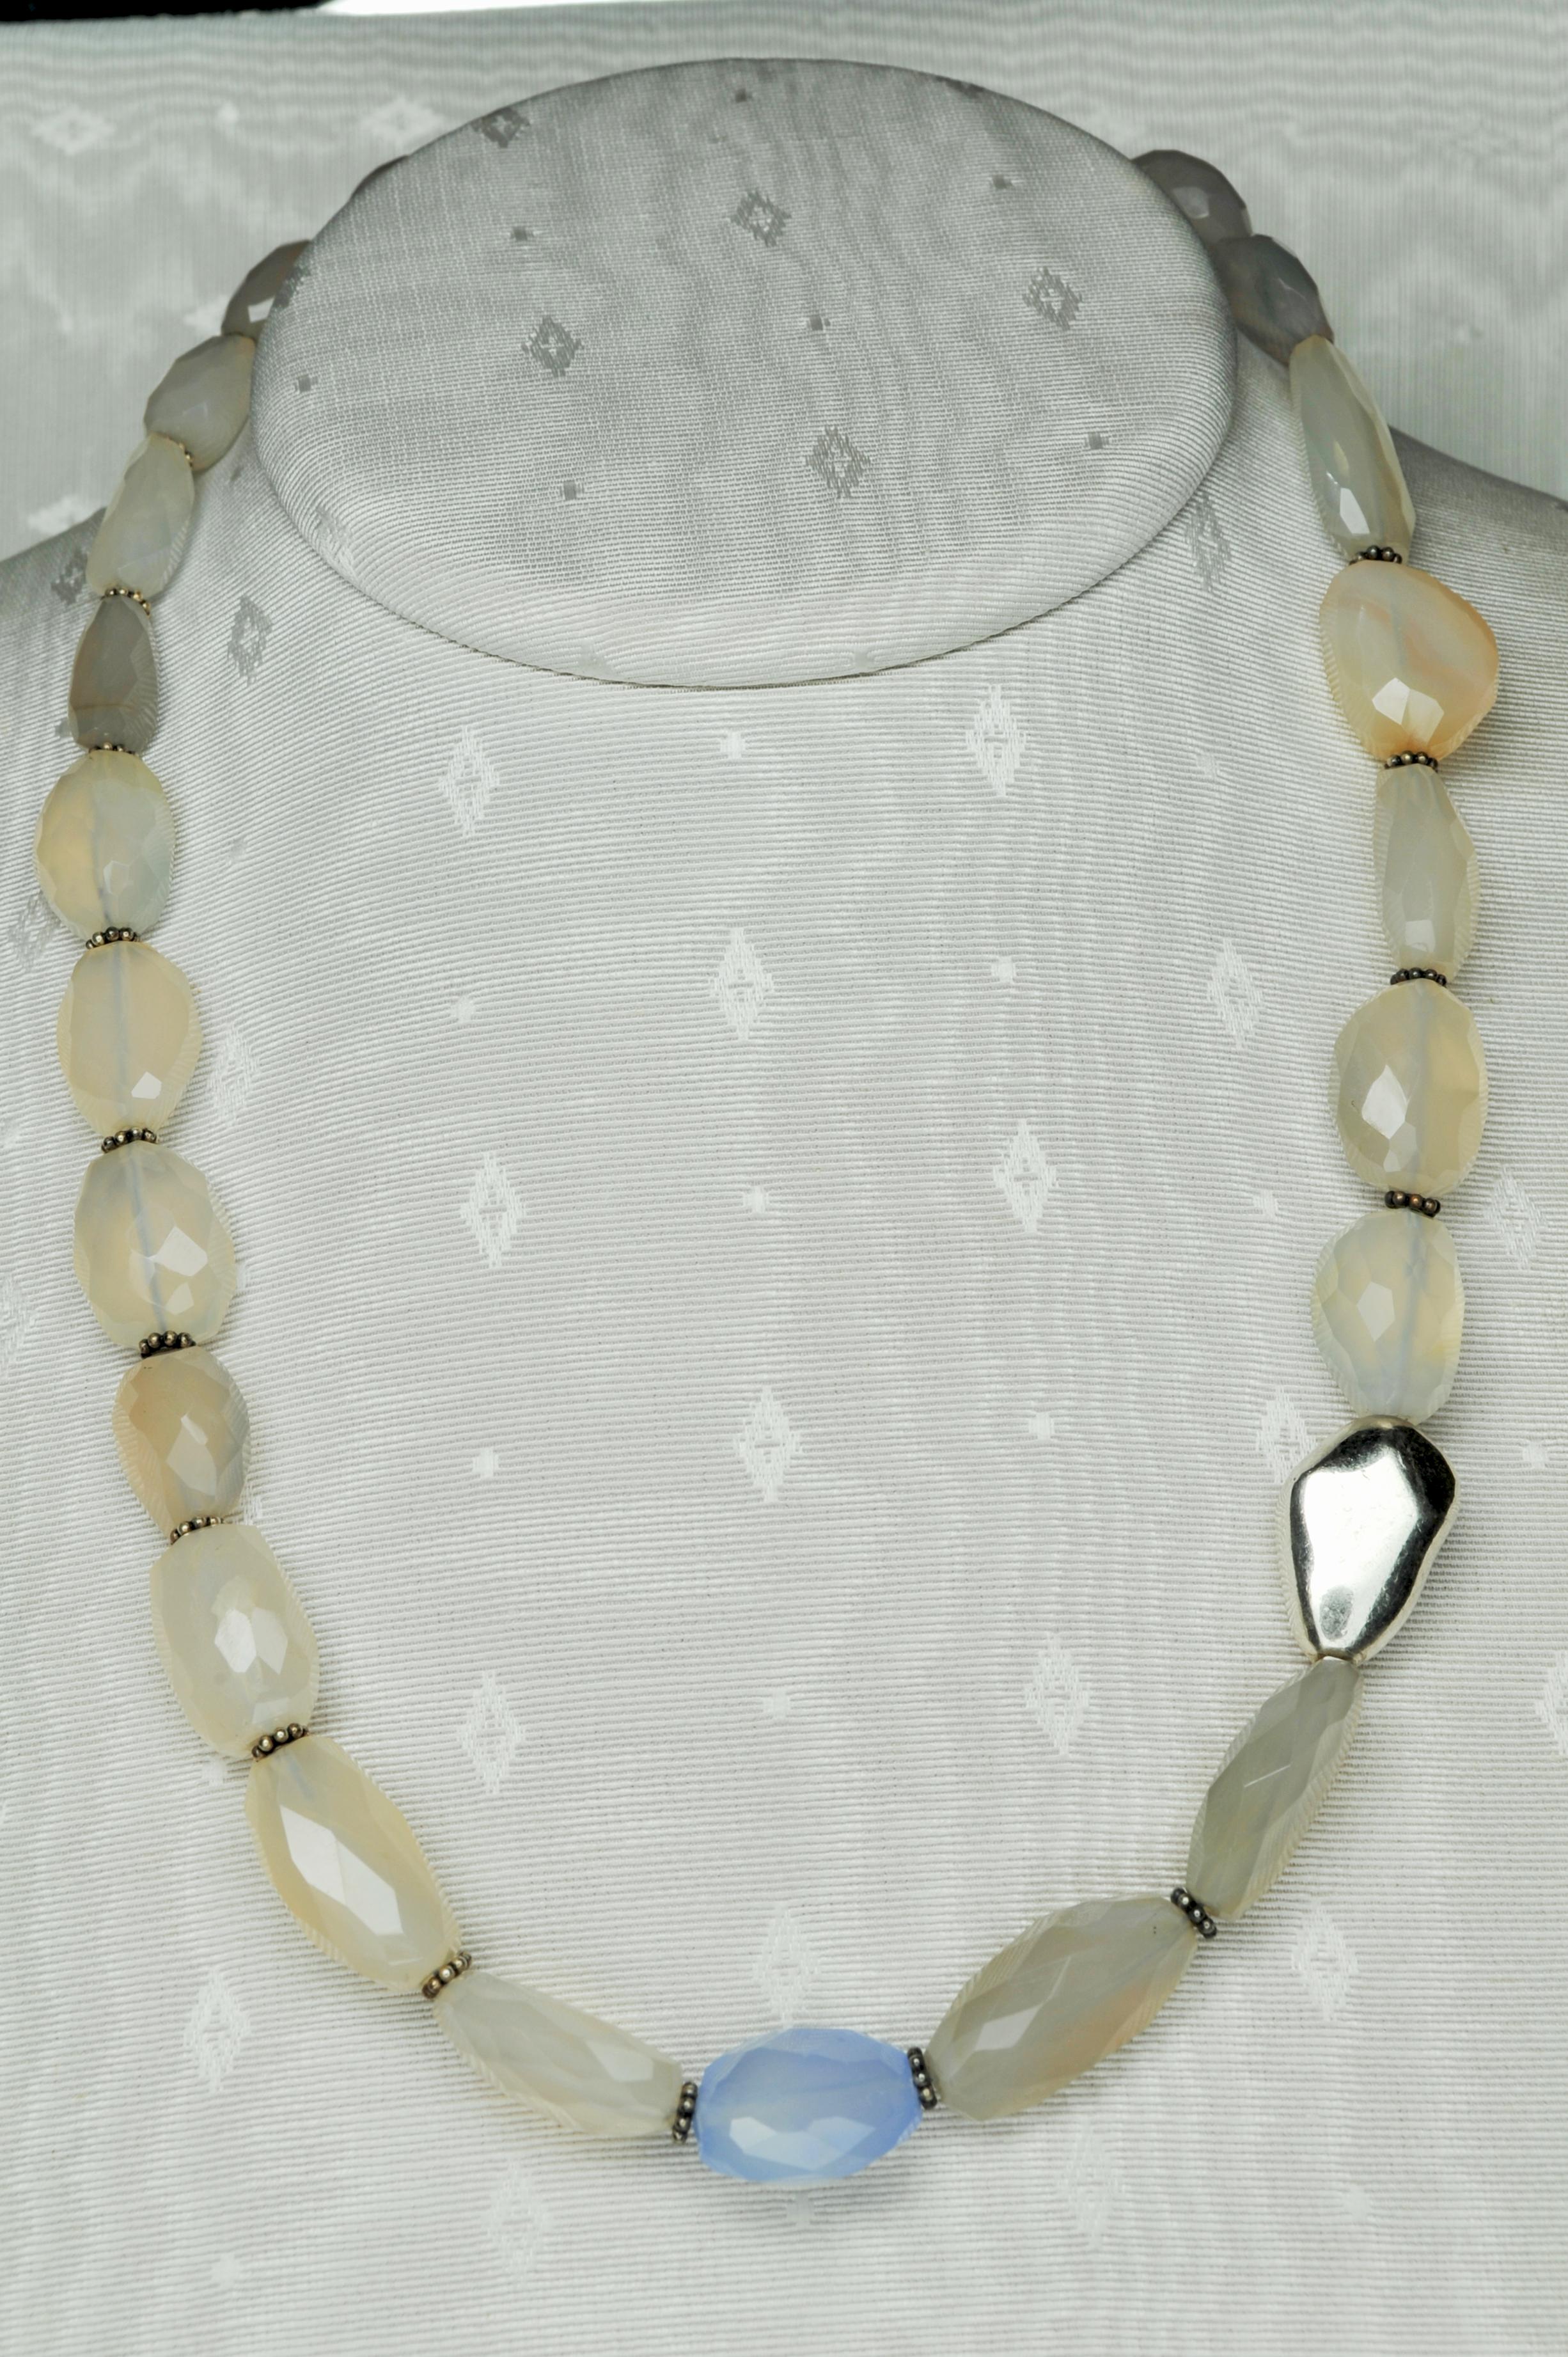 Necklace with Chalcedony stones and sterling silver elements